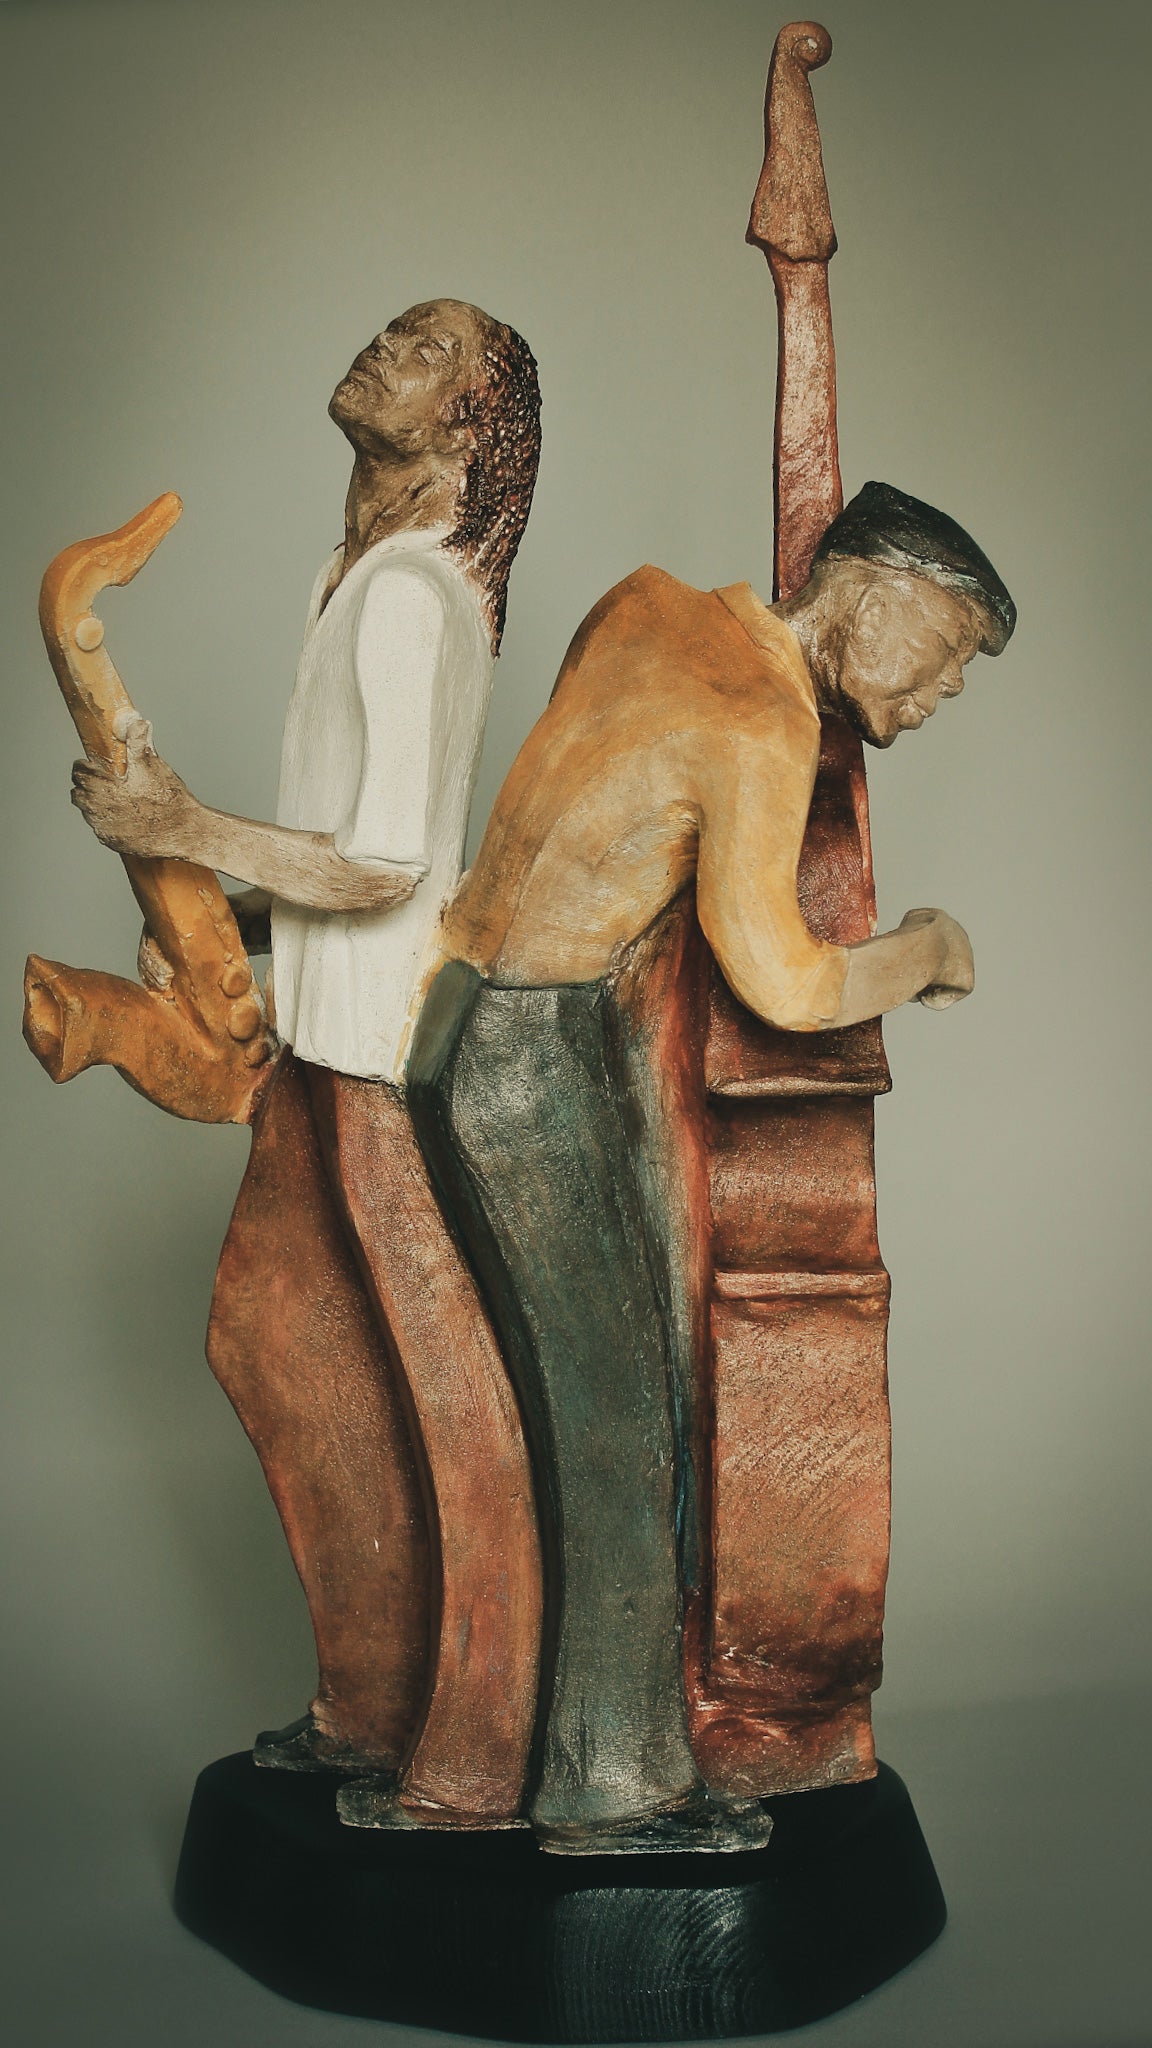 * Harmonizing In D | Stoneware Sculpture | Saxist & Bassist Pause to Rest Between Beats